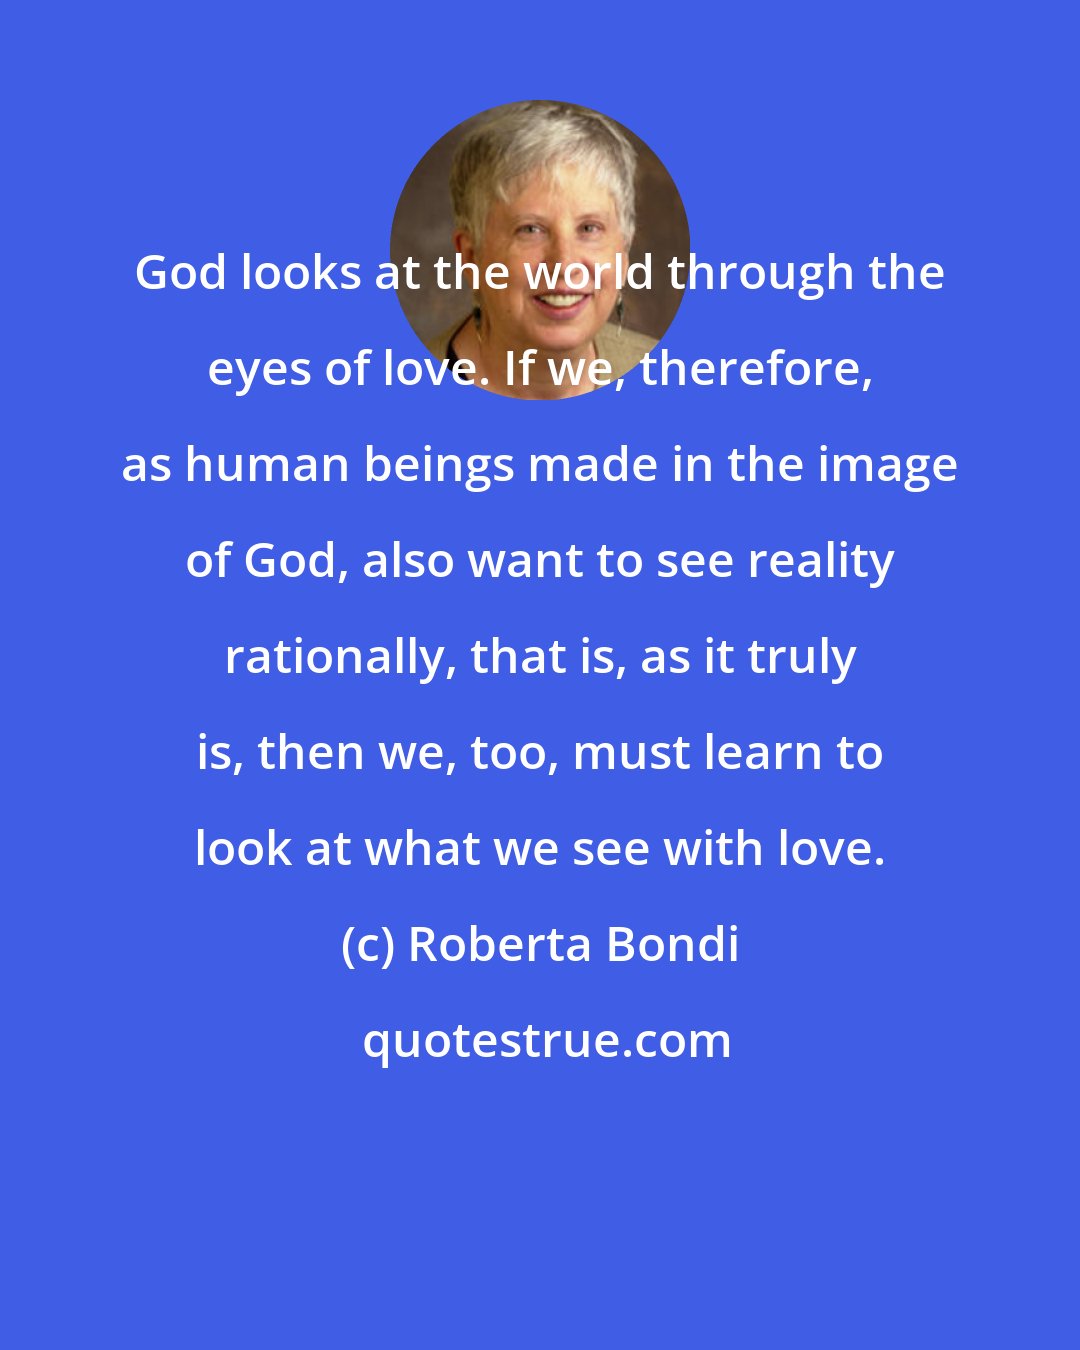 Roberta Bondi: God looks at the world through the eyes of love. If we, therefore, as human beings made in the image of God, also want to see reality rationally, that is, as it truly is, then we, too, must learn to look at what we see with love.